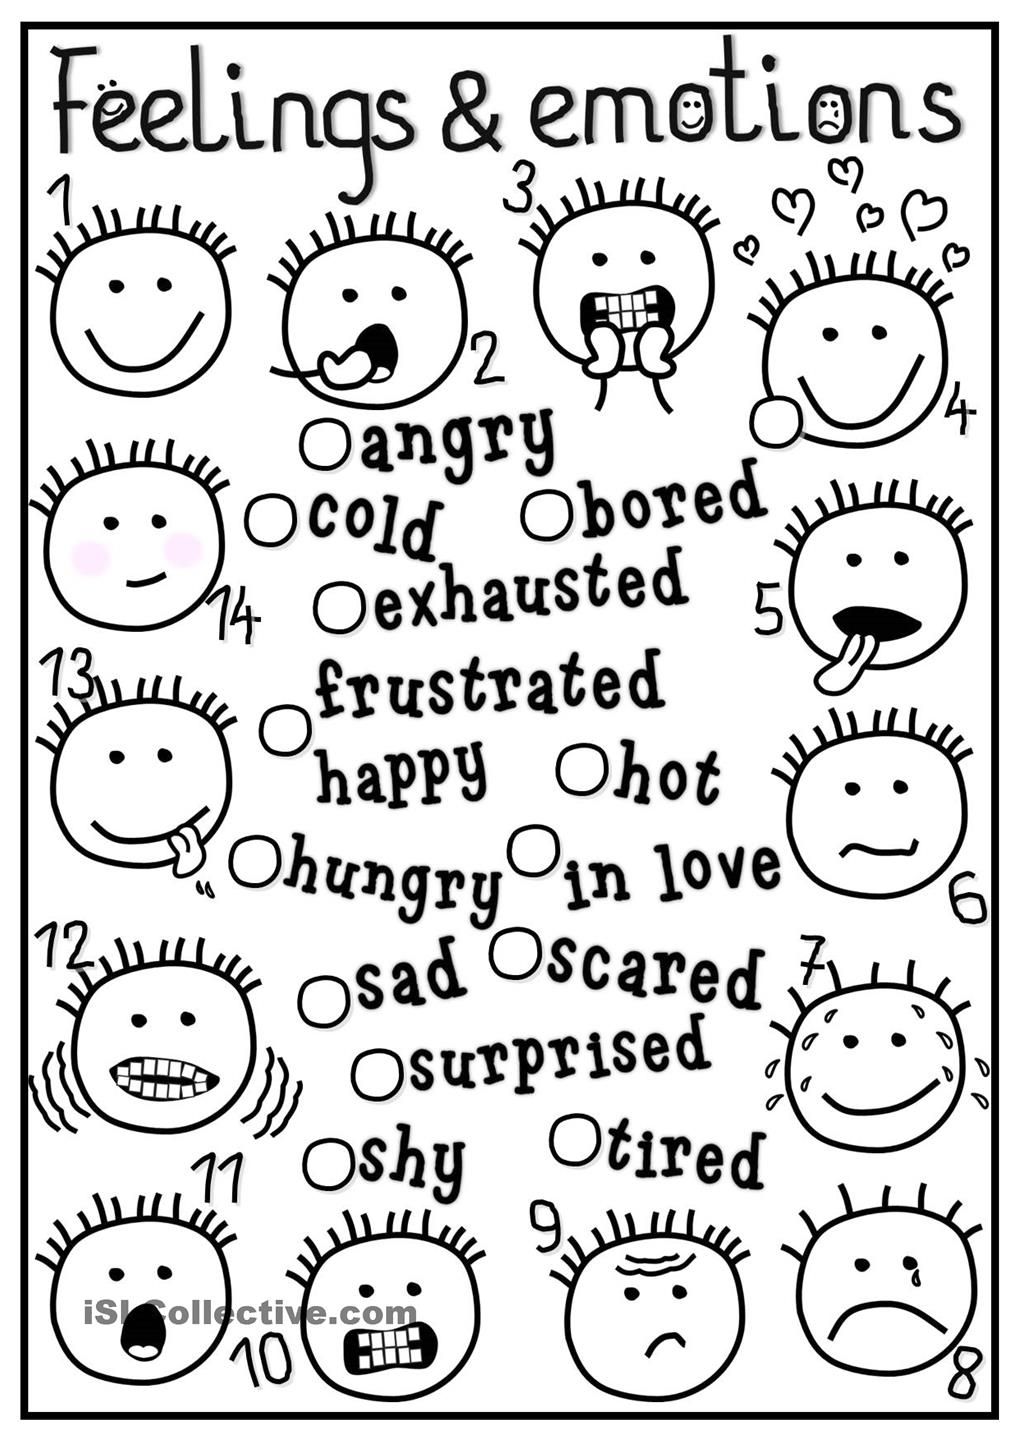 Free coloring pages feelings emotions esl